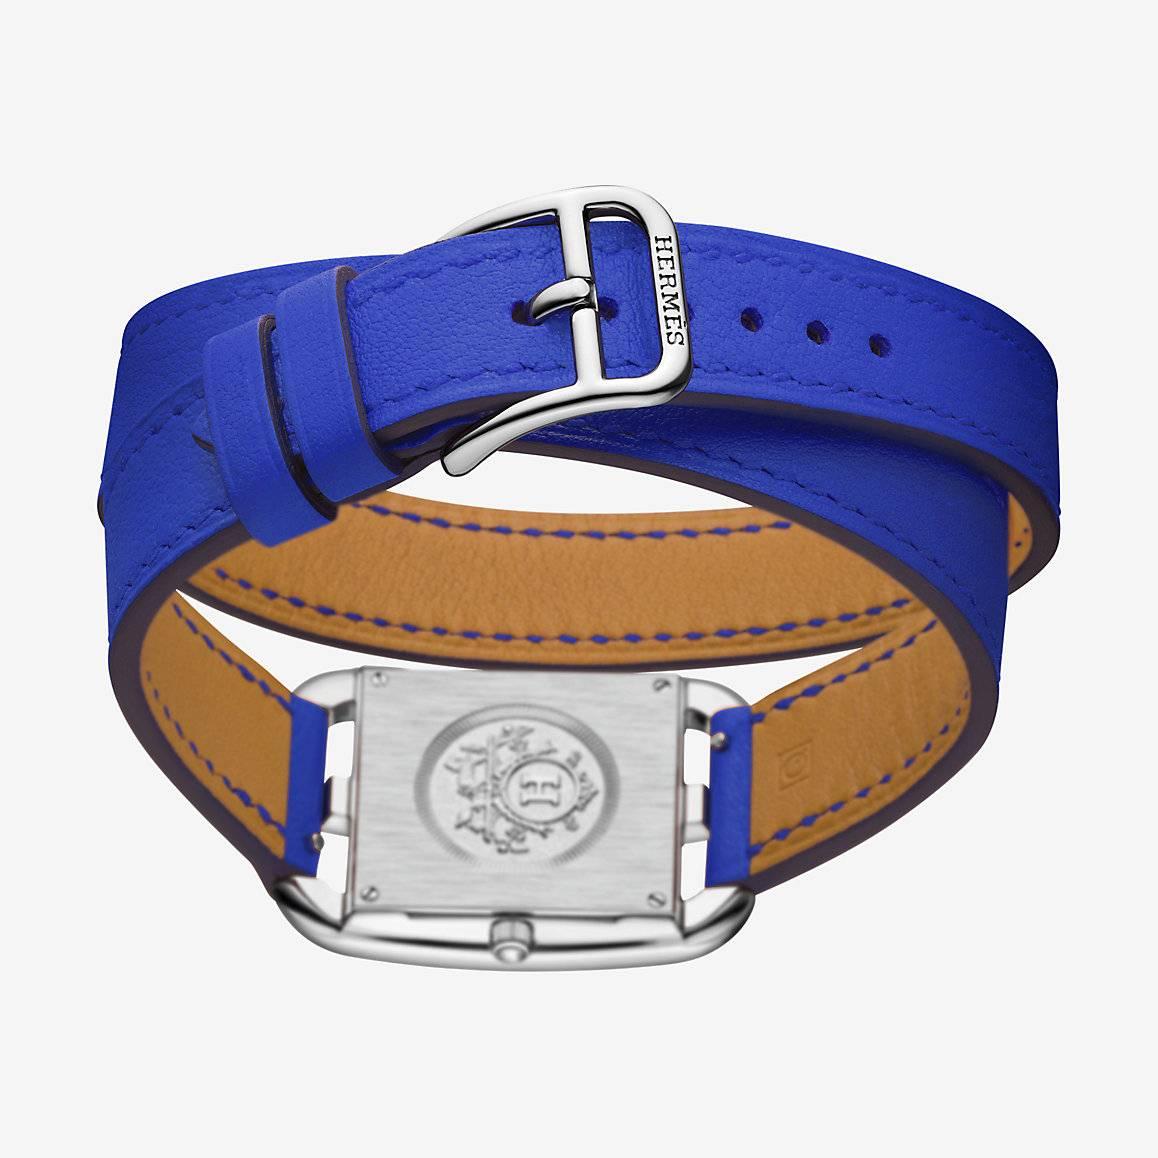 New Hermes Watch Cape Cod Blue Electric Double Strap 